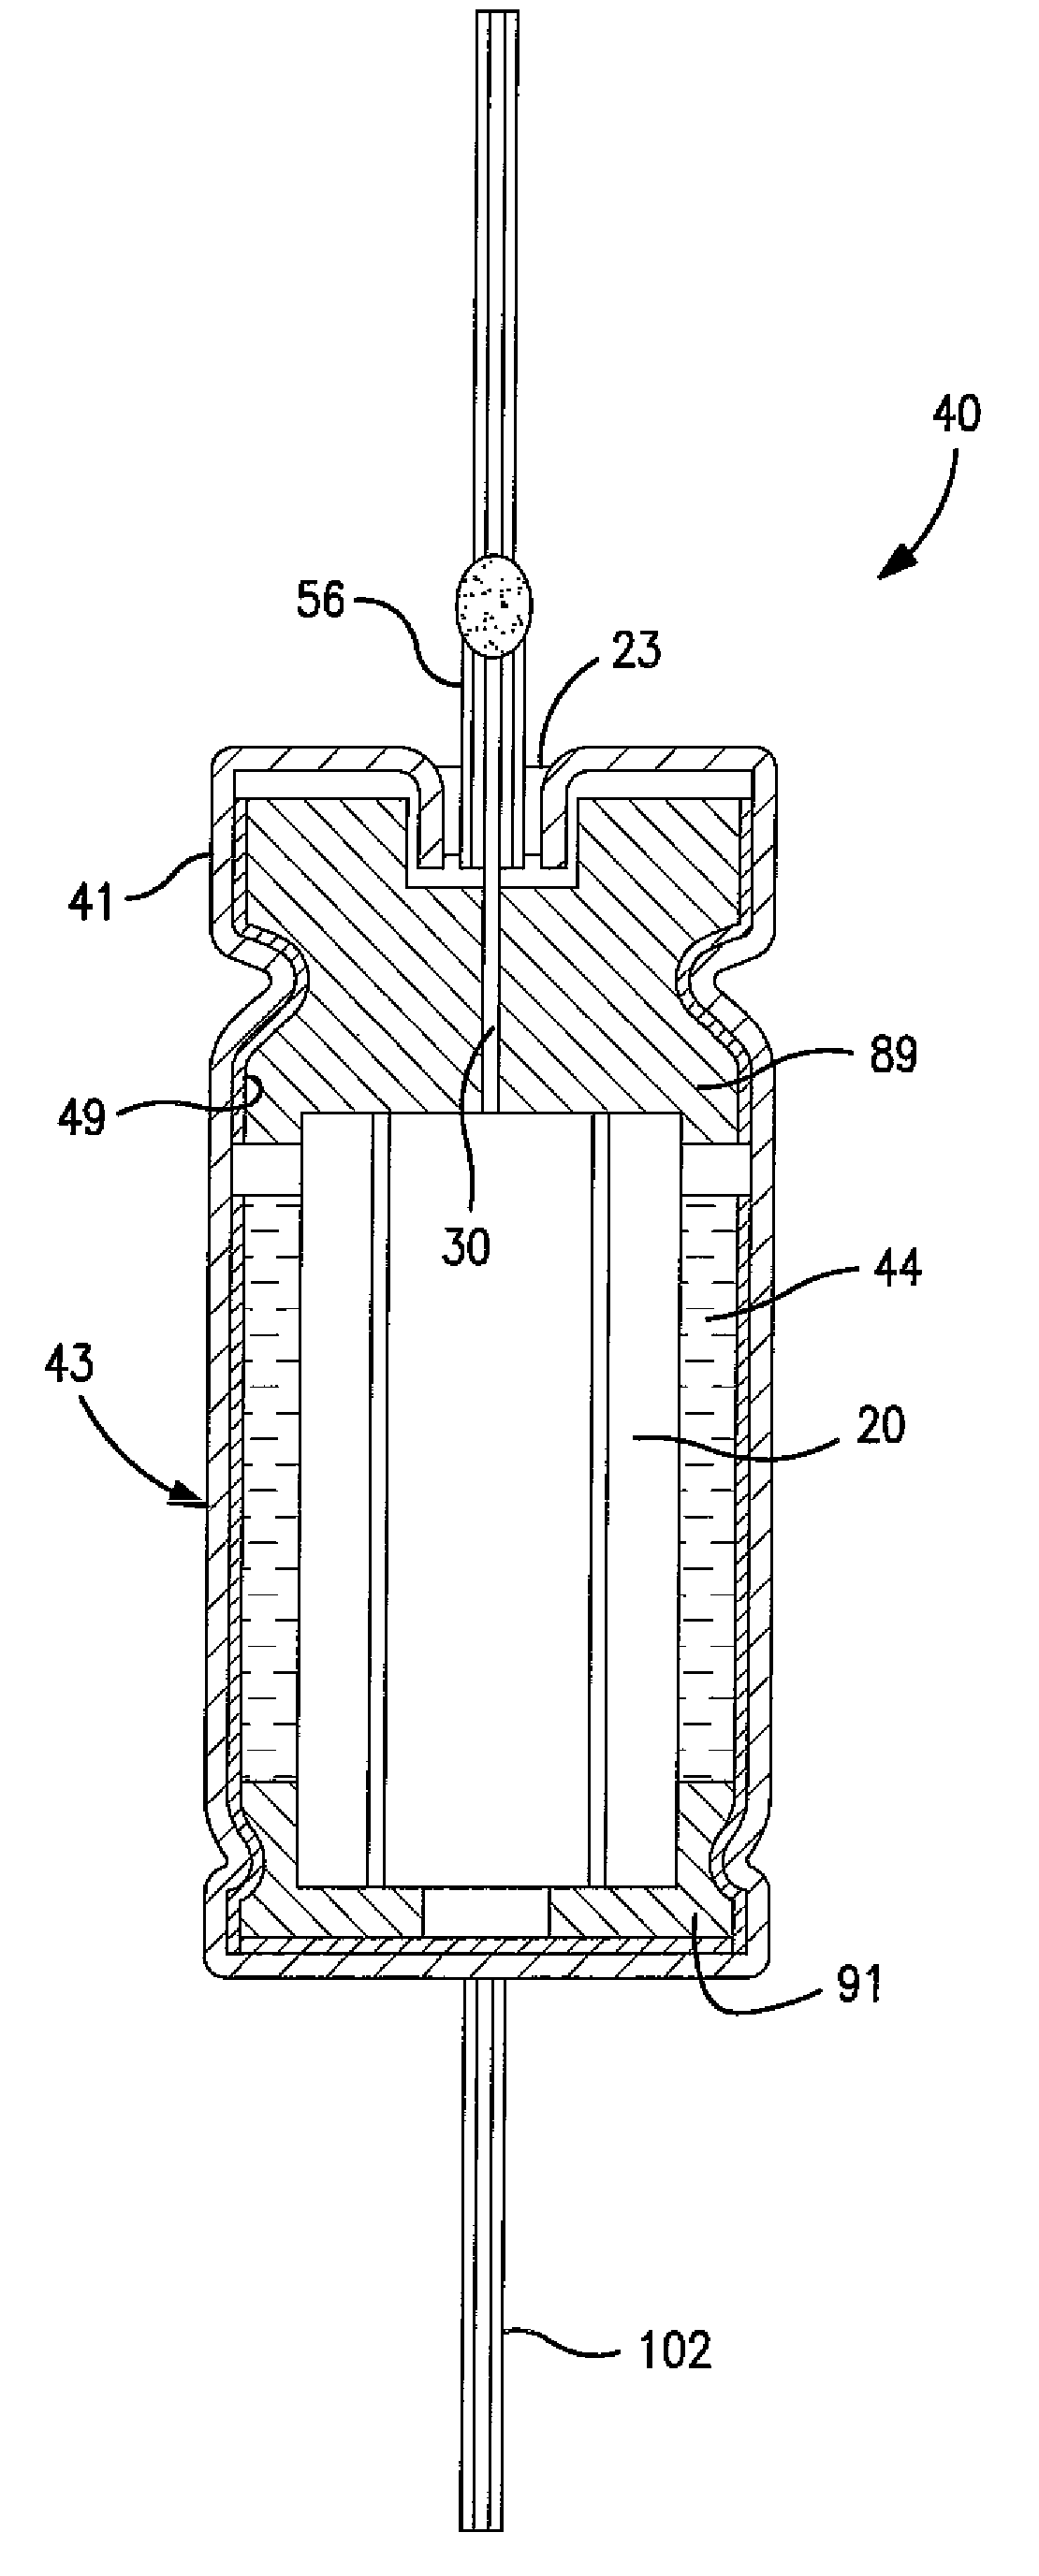 Wet Capacitor Cathode Containing a Conductive Coating Formed Anodic Electrochemical Polymerization of a Microemulsion